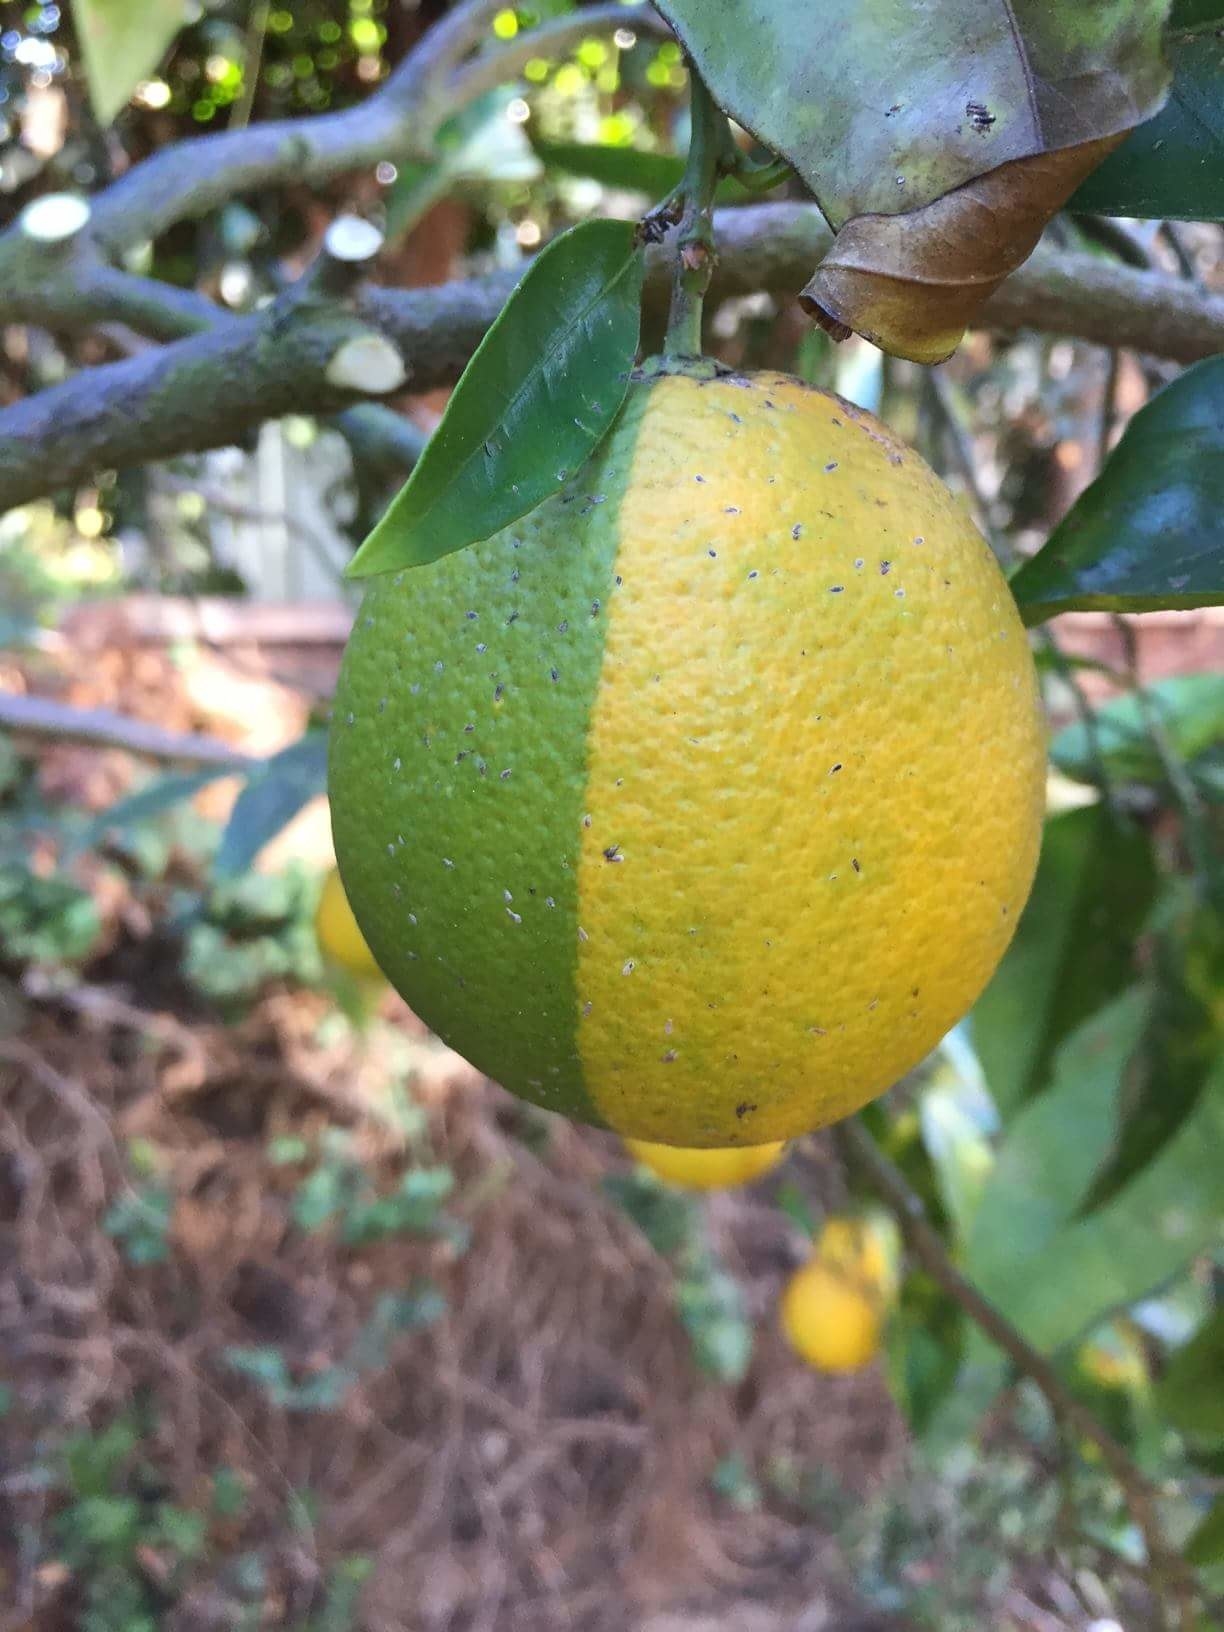 A fruit that look slike a lemon, but it is half yellow and half green, the colors meeting in the middle, forming a perfect straight line